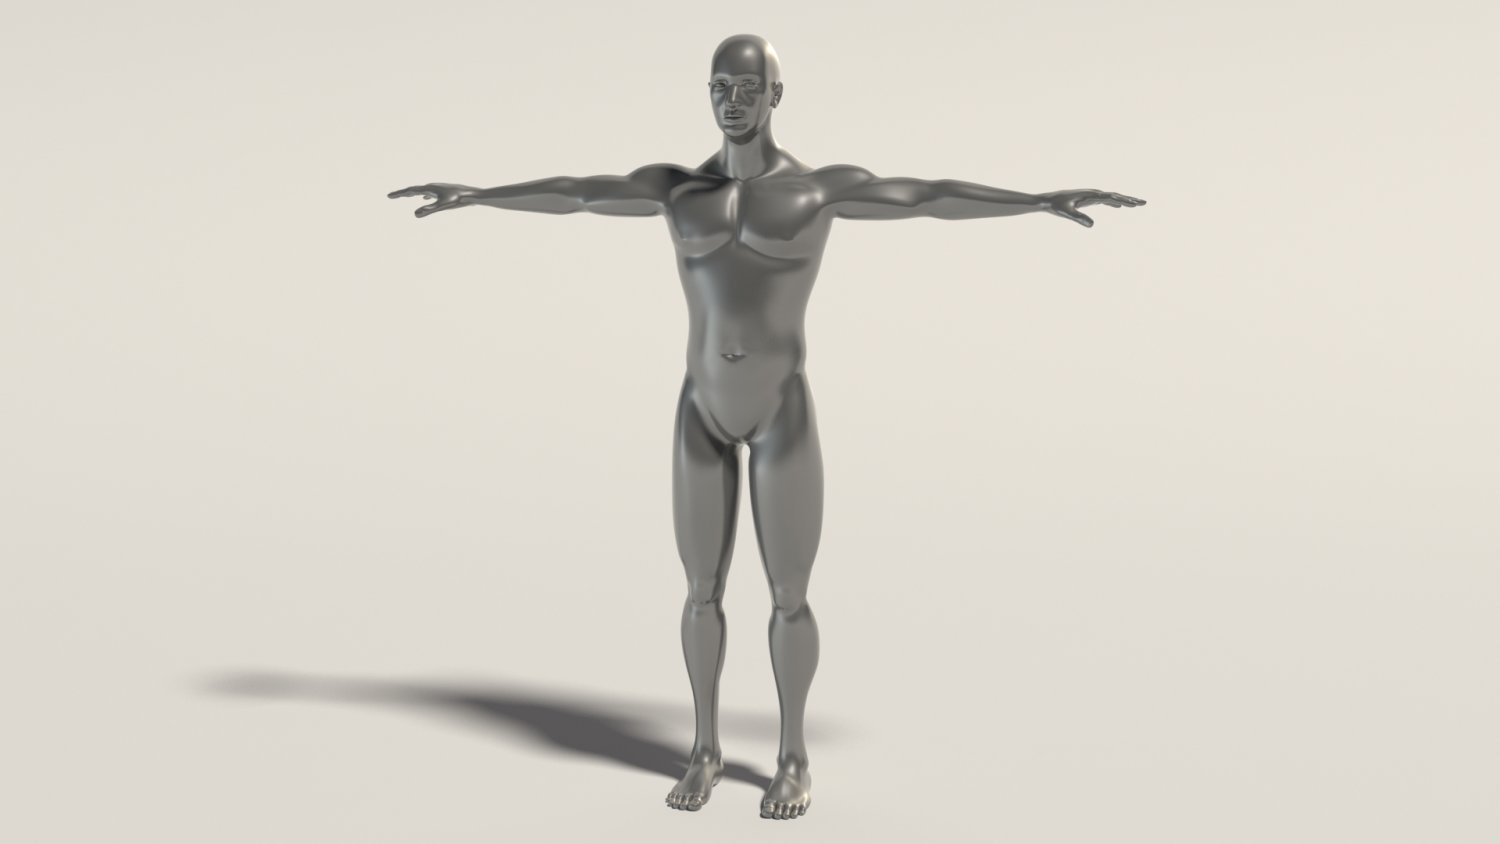 Young man in T pose 3d model 3ds max,Lightwave,Object files free, t pose  character - thirstymag.com